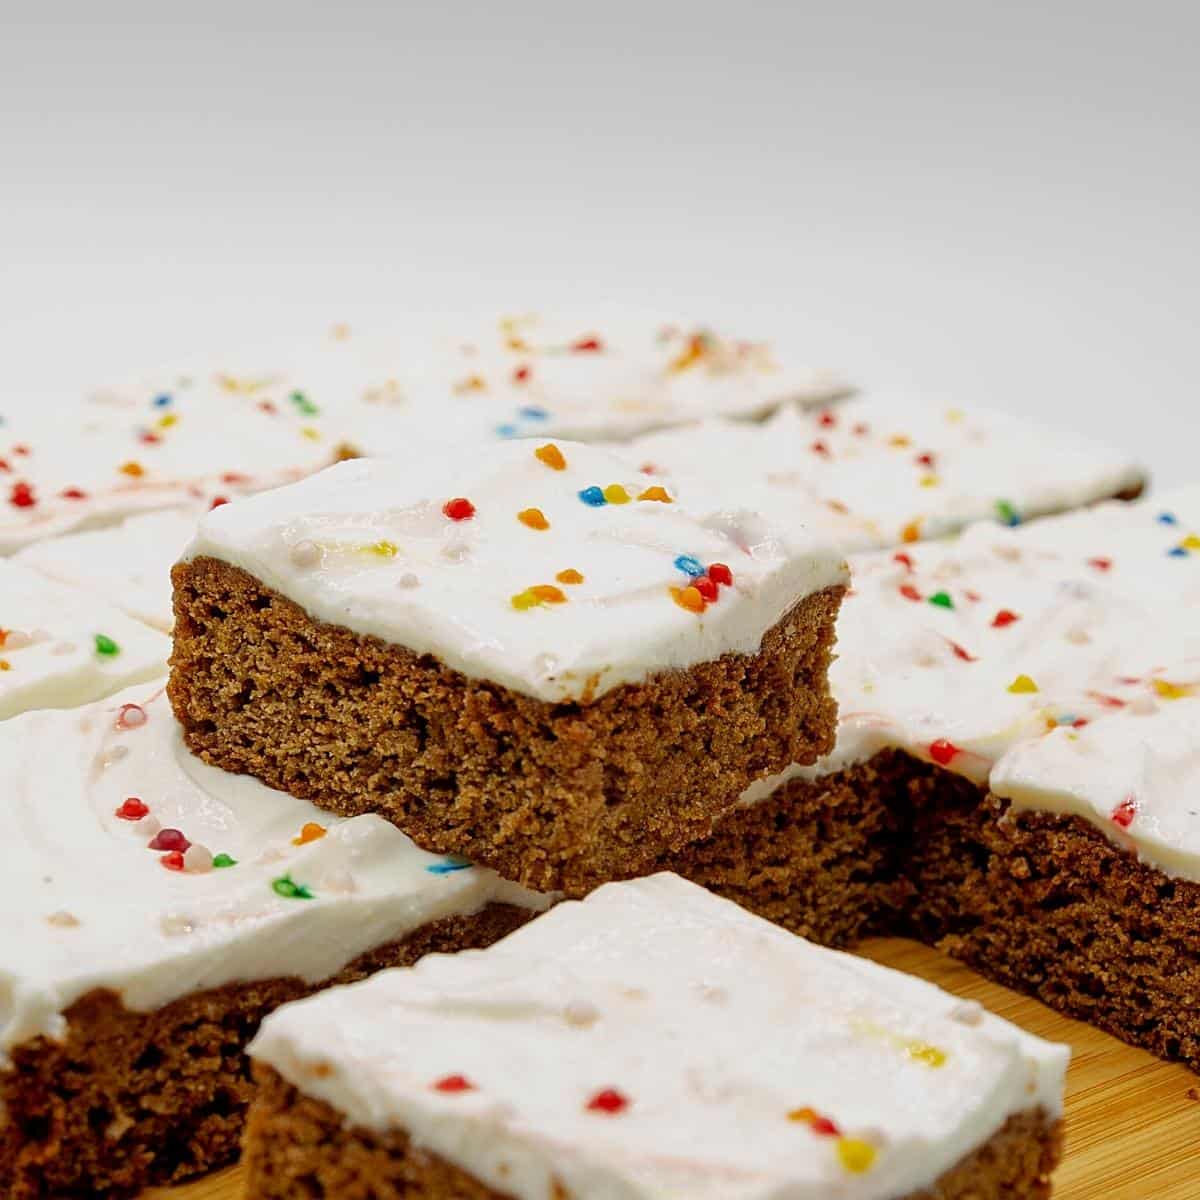 Stack of gingerbread cookie bars on a wooden board.